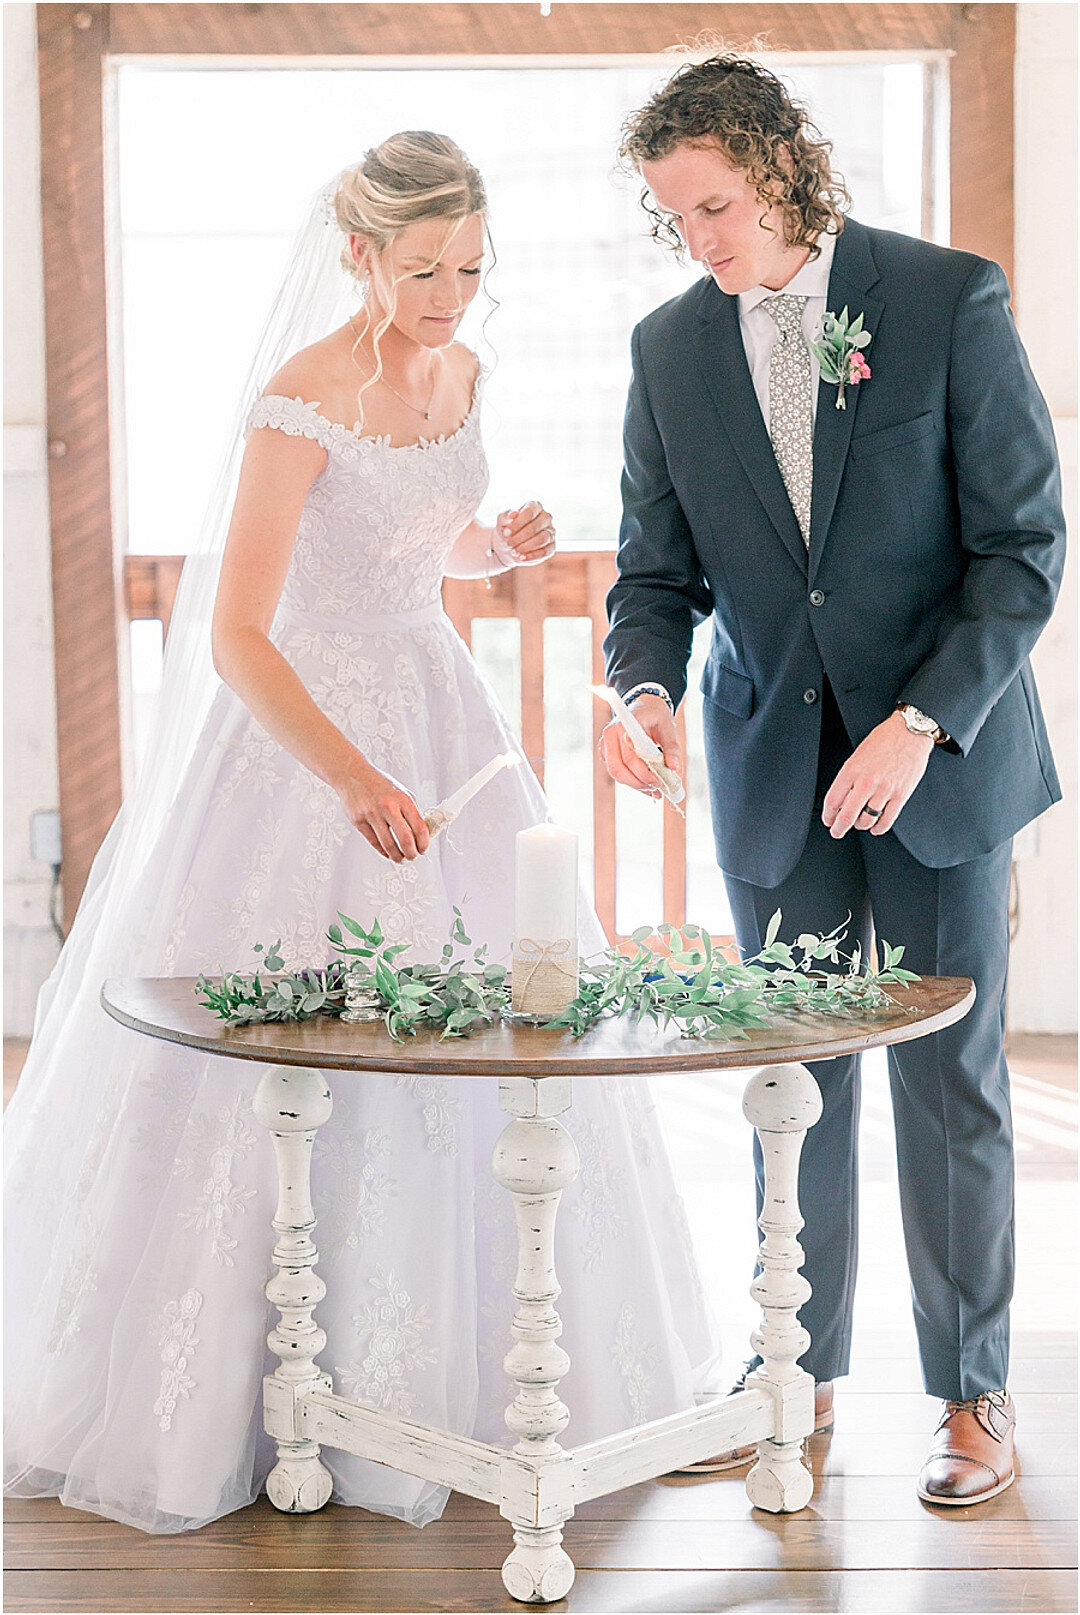 Endearing and Whimsical Barn Wedding at Stoltzfus Homestead and Gardens